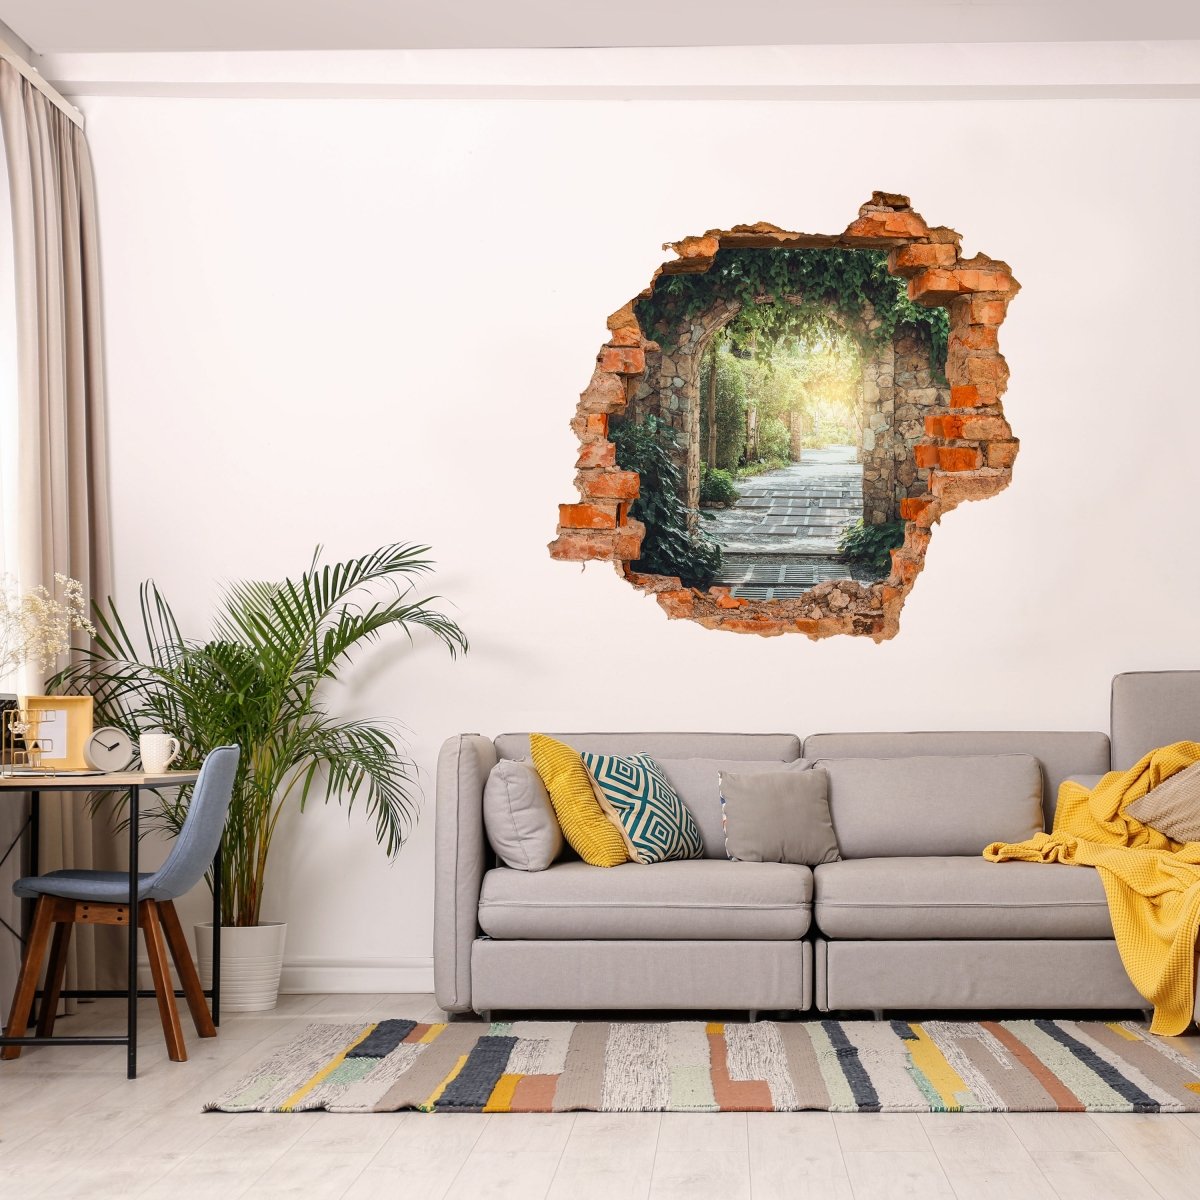 3D wall sticker old archway, ruins, ivy, nature - wall decal M1108